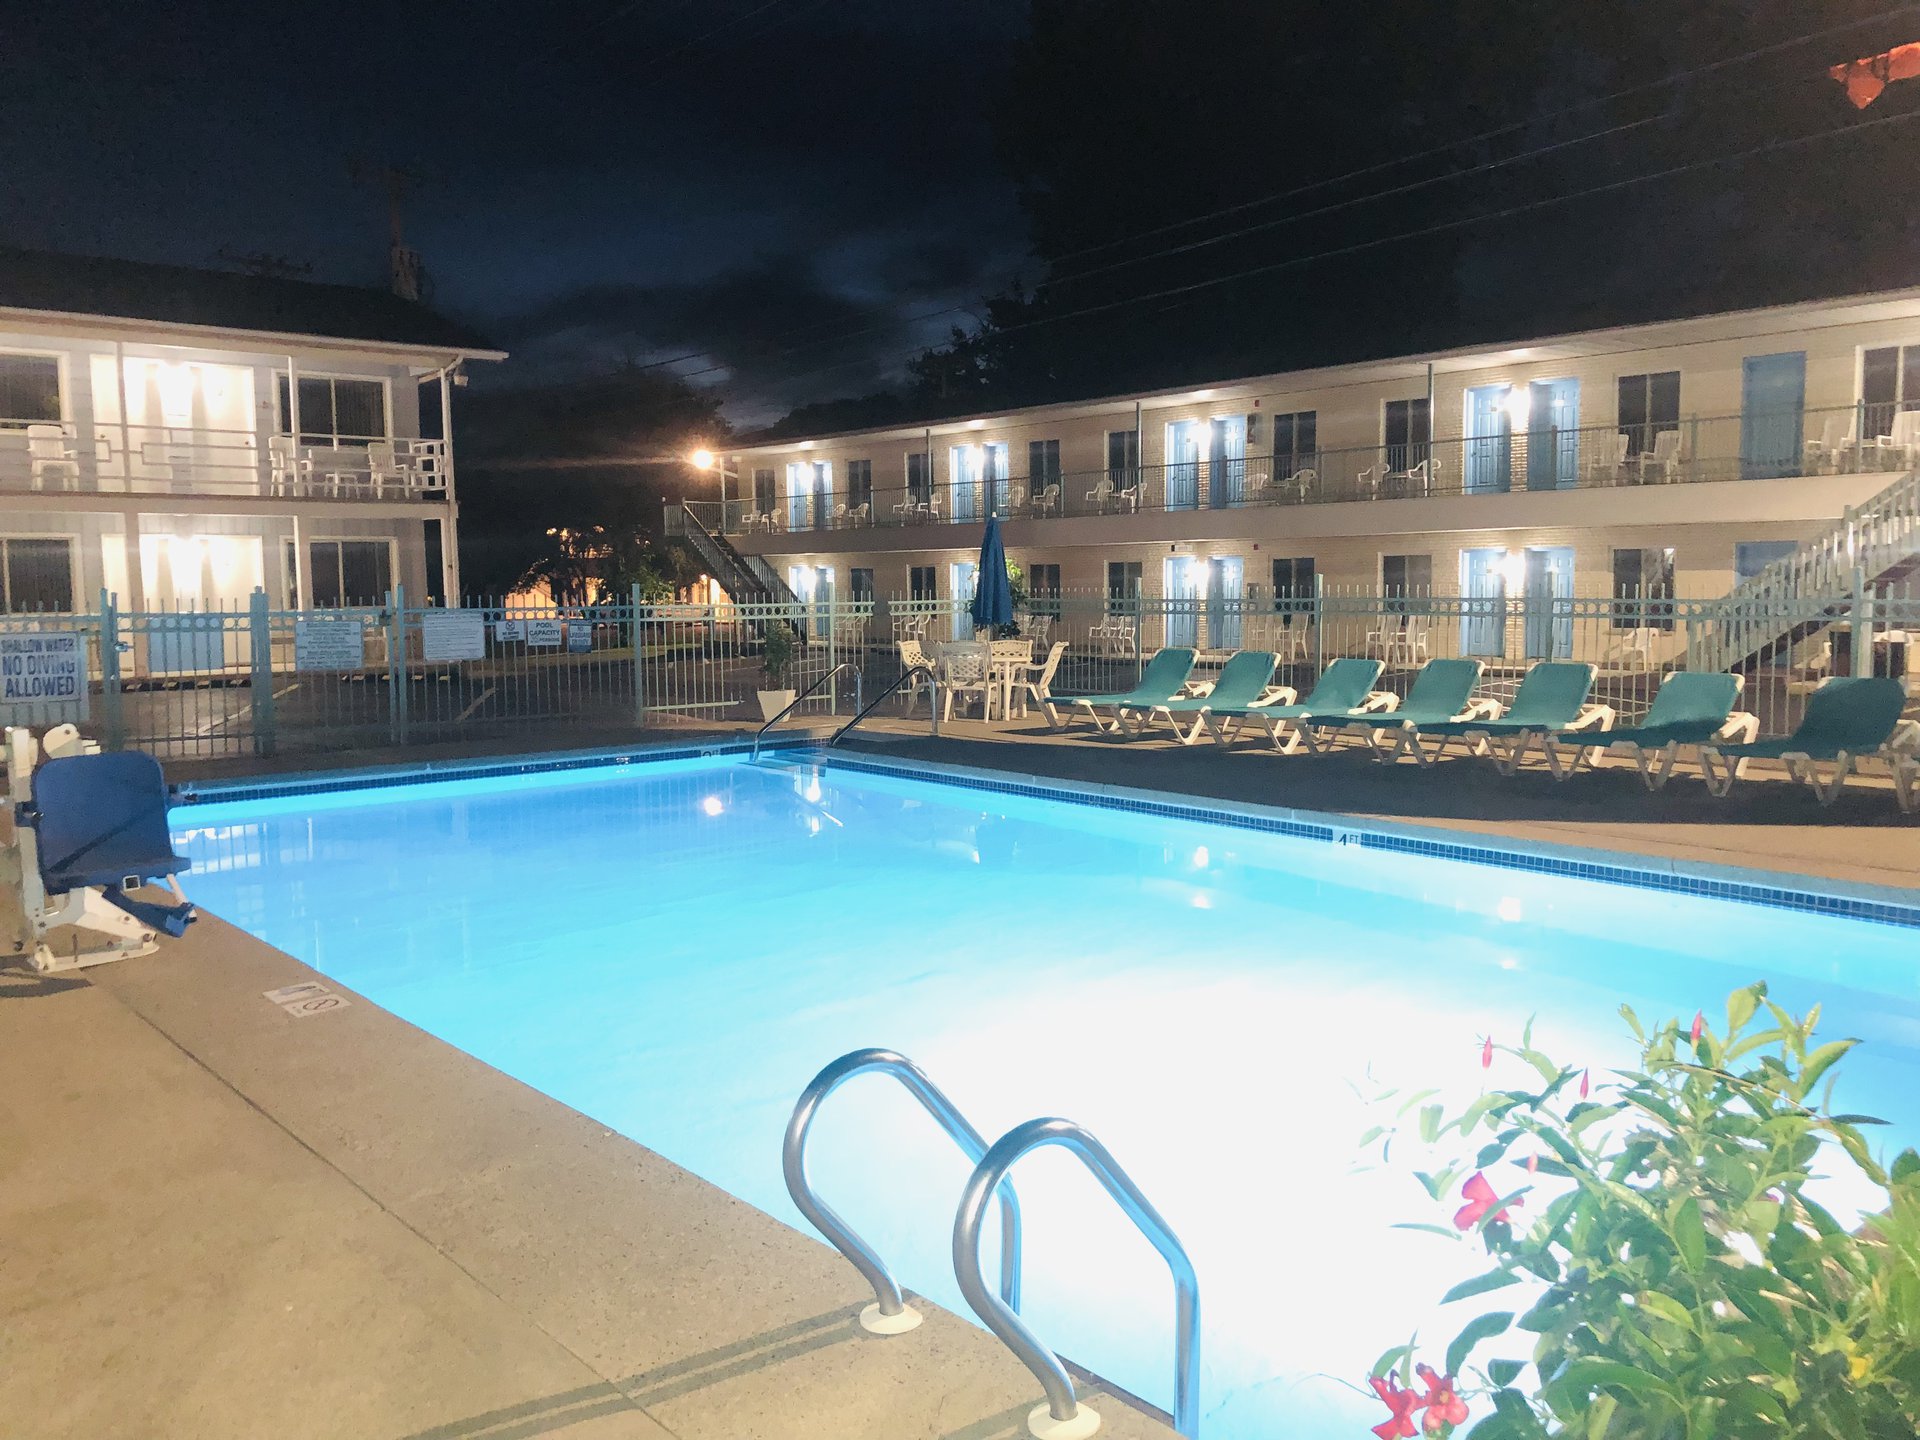 Starlite Motel heated outdoor pool with lounging chairs and seating area